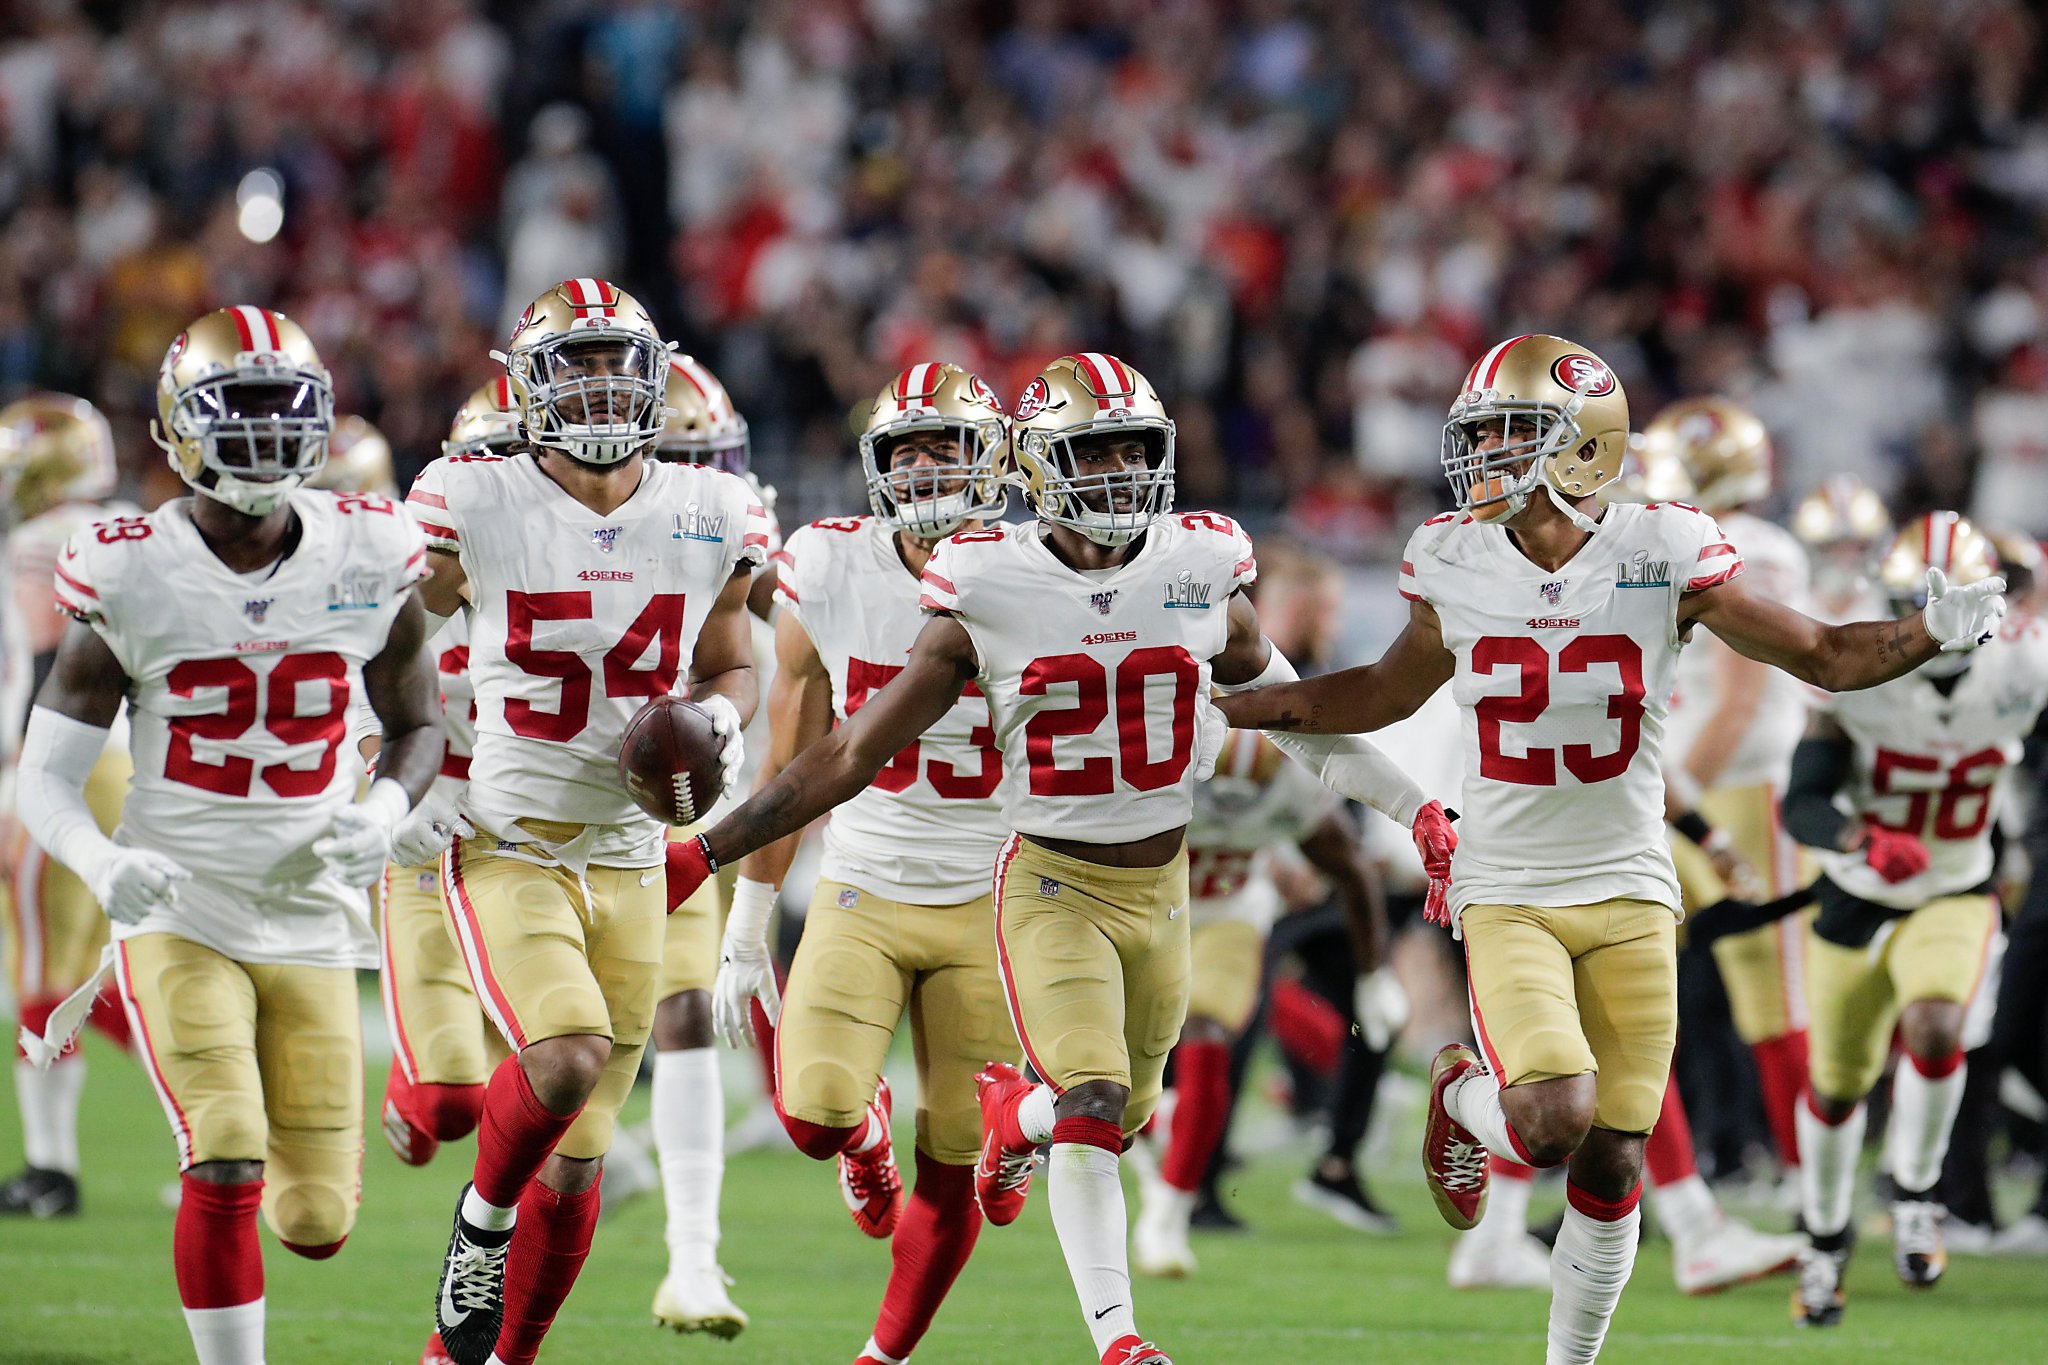 Future looks bright': Bay Area Twitter reacts to 49ers' Super Bowl loss